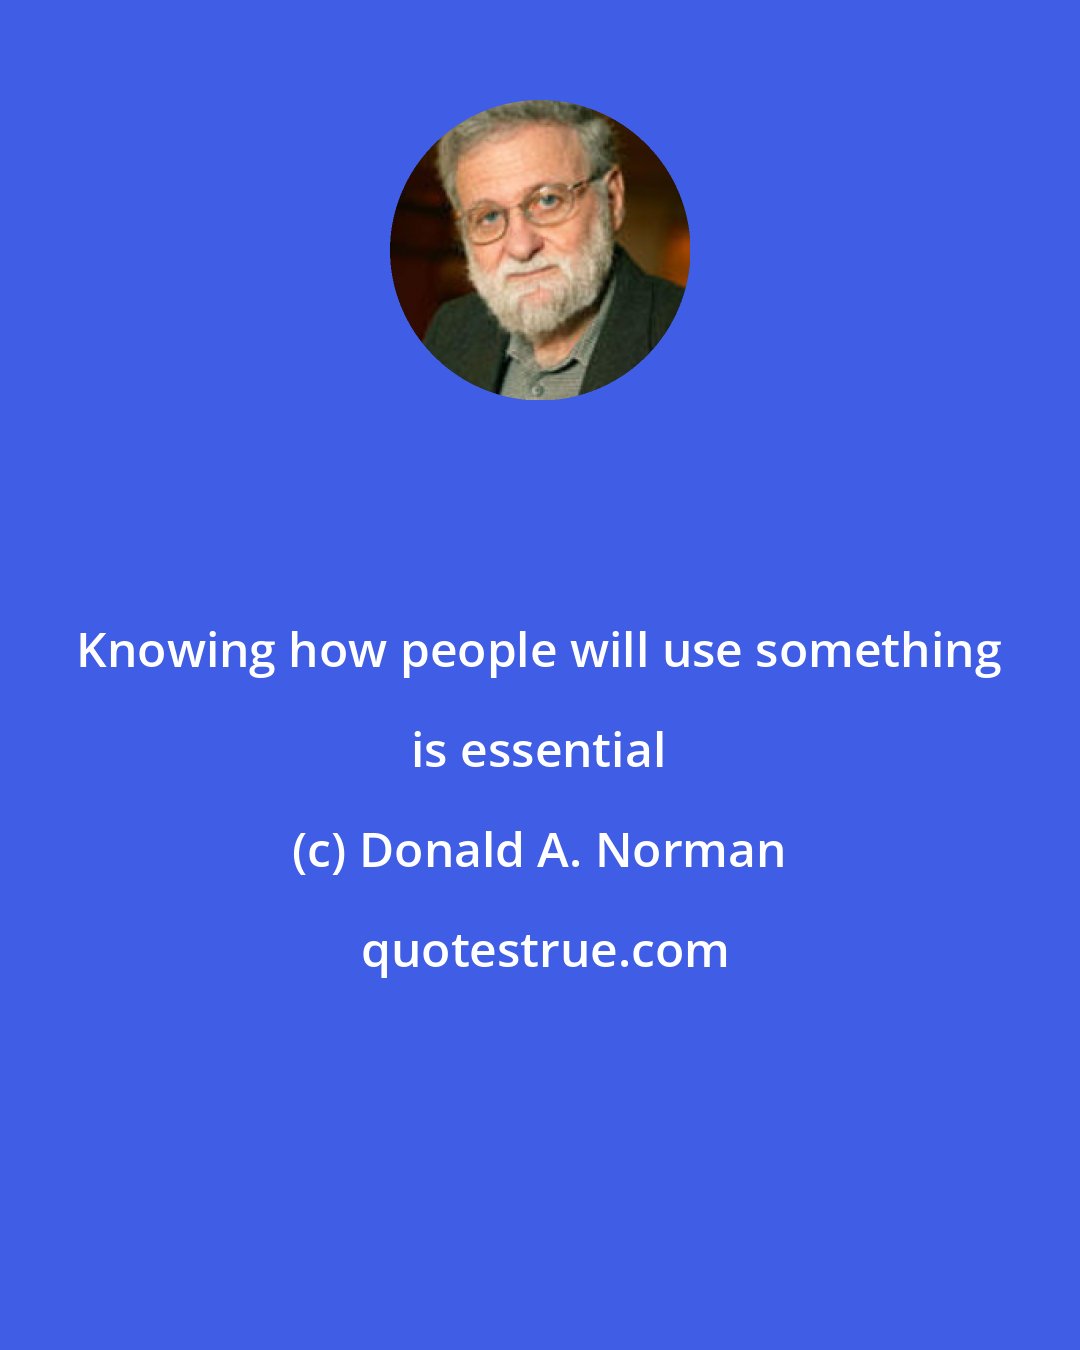 Donald A. Norman: Knowing how people will use something is essential